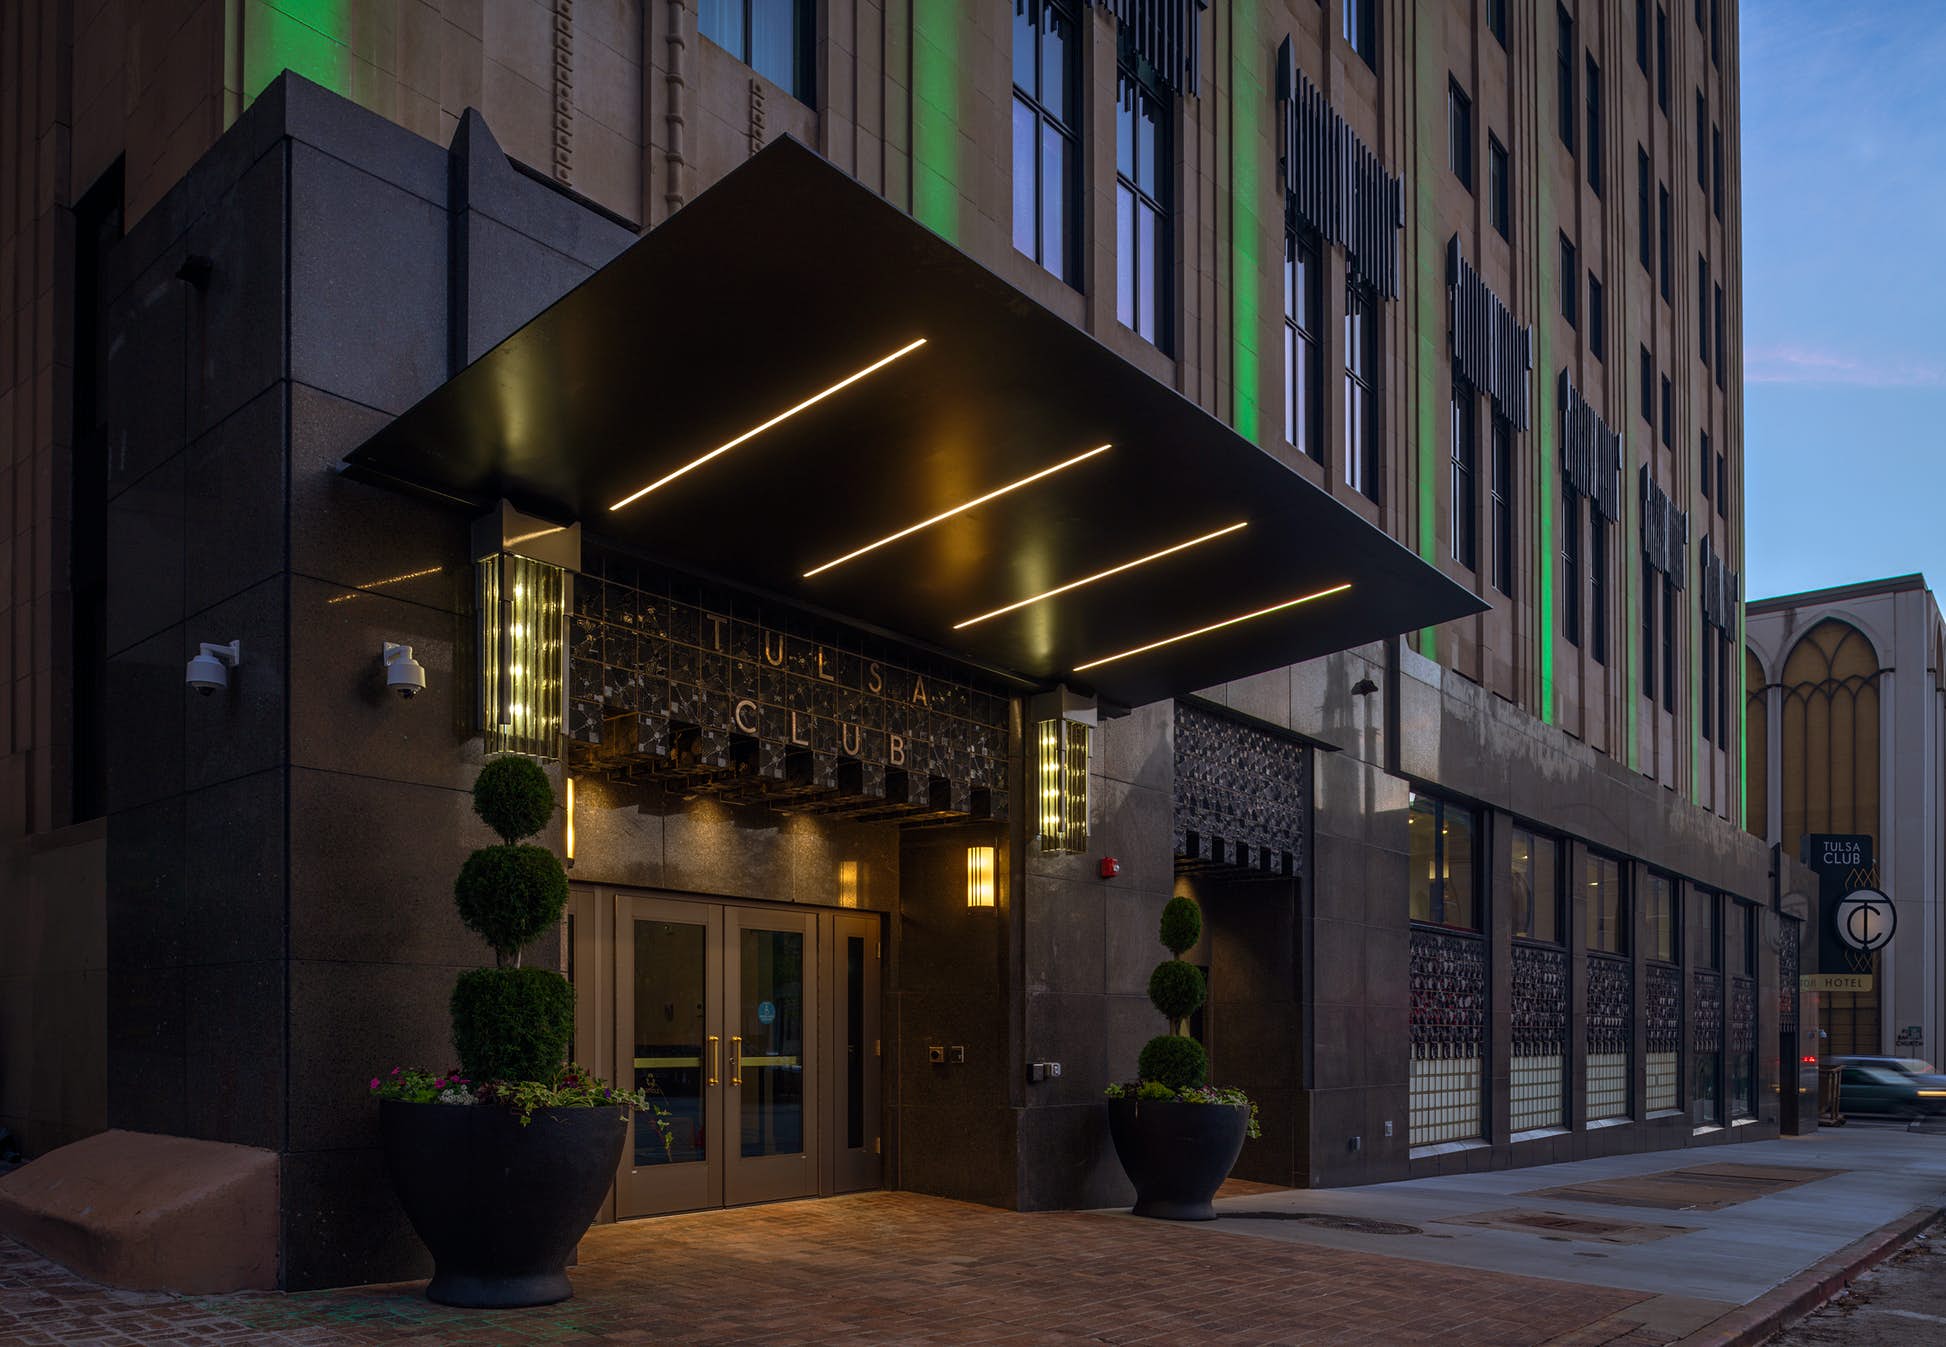 This historic hotel harkens back when Tulsa glittered with new money and art deco glam © courtesy of the Curio Collection by Hilton